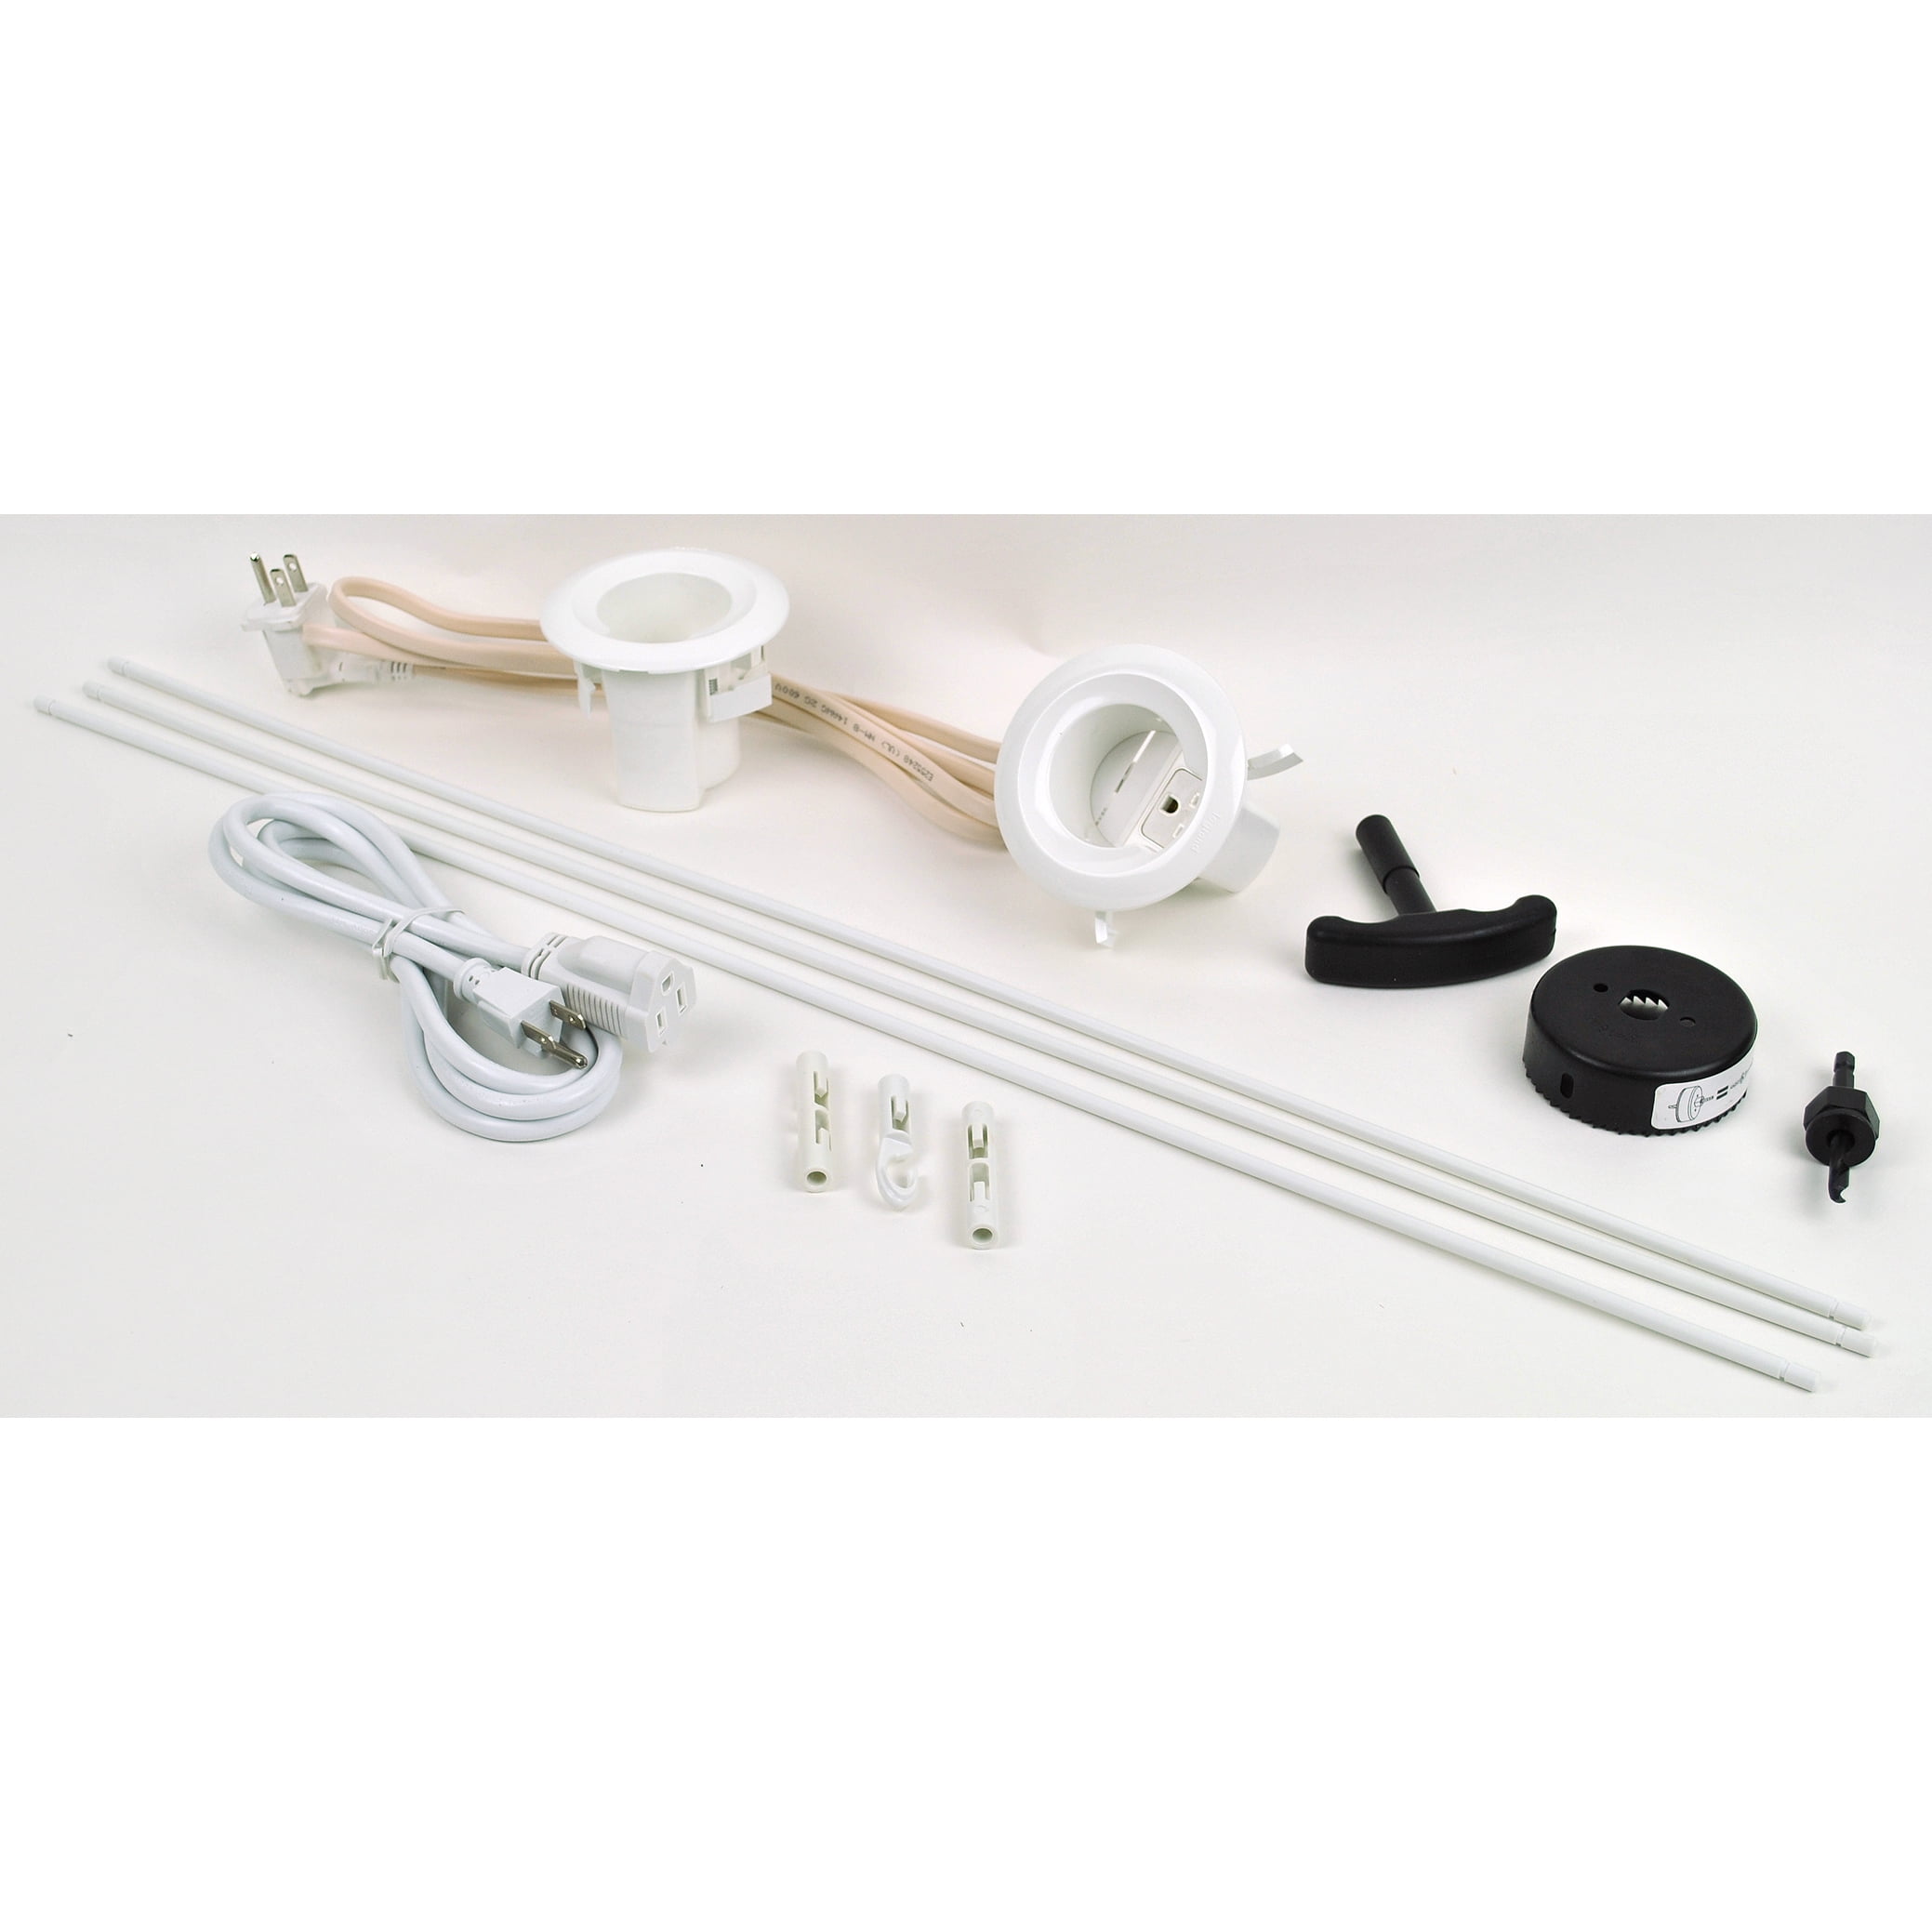 Wiremold Cord Management Kit in Wall Flat Screen TV Wire and Cable Hider